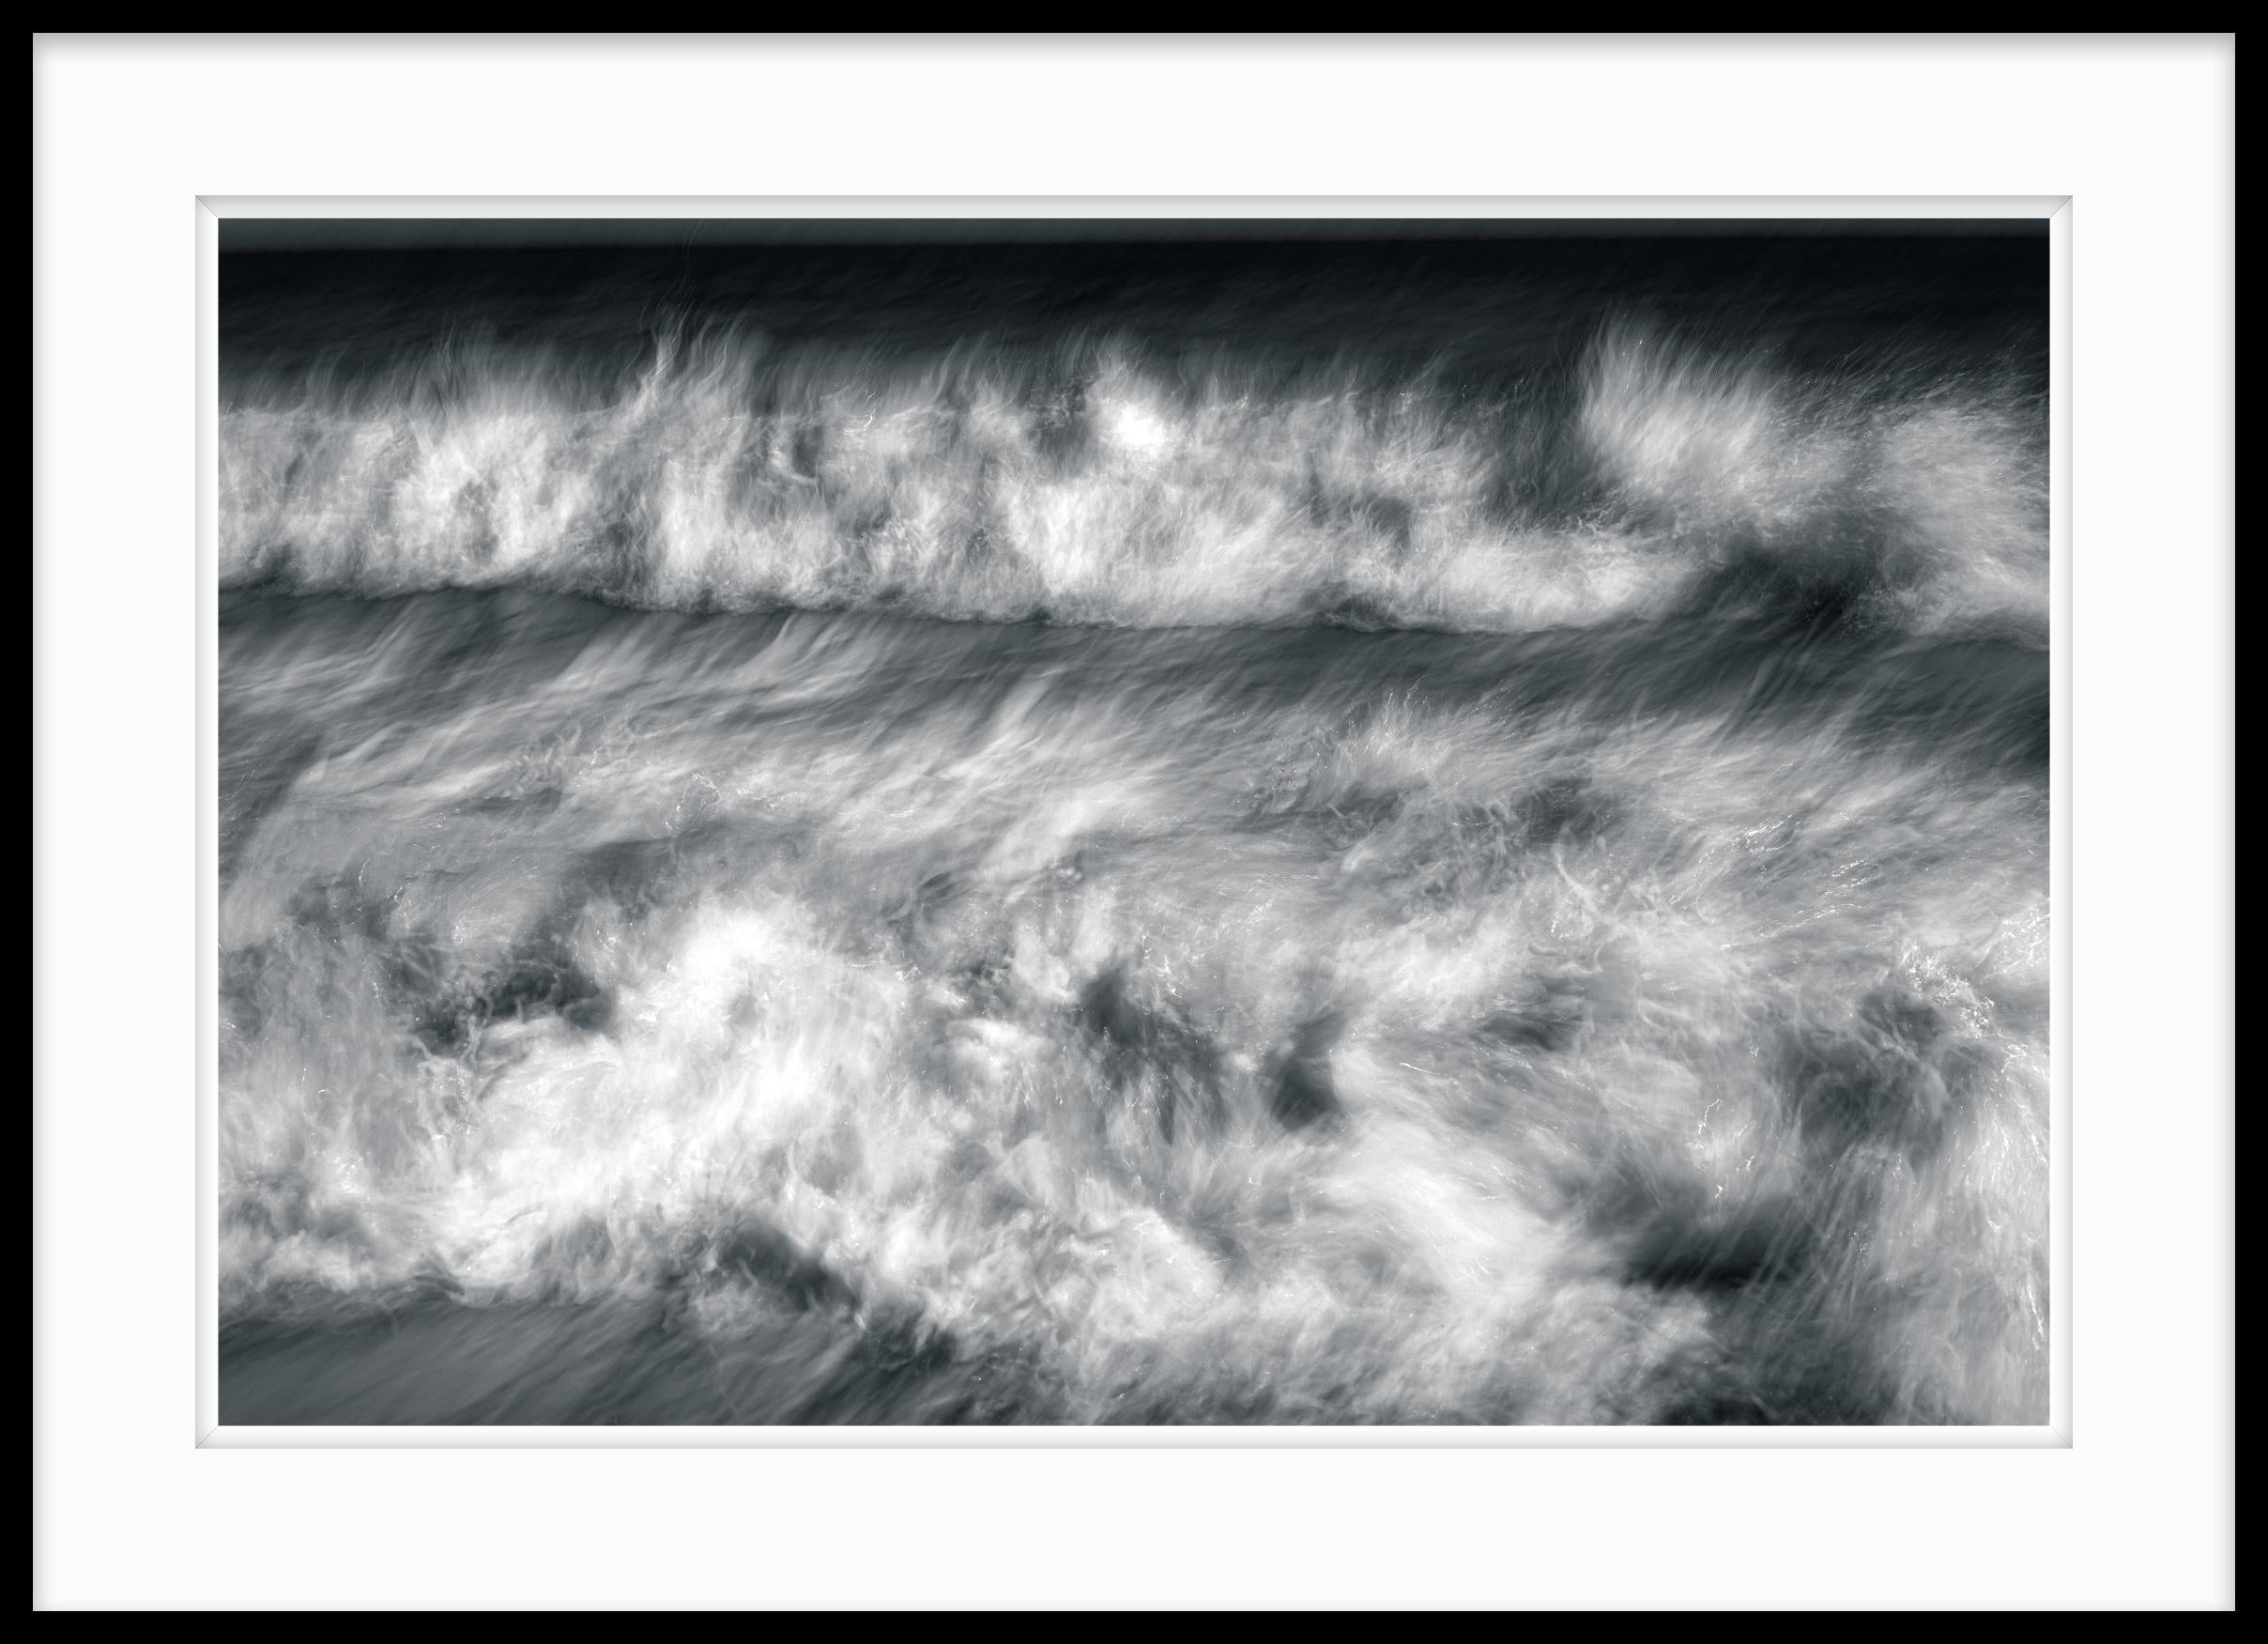 Waves - Ocean Ethereal Photograph Black and White #20 - Gray Black and White Photograph by Howard Lewis